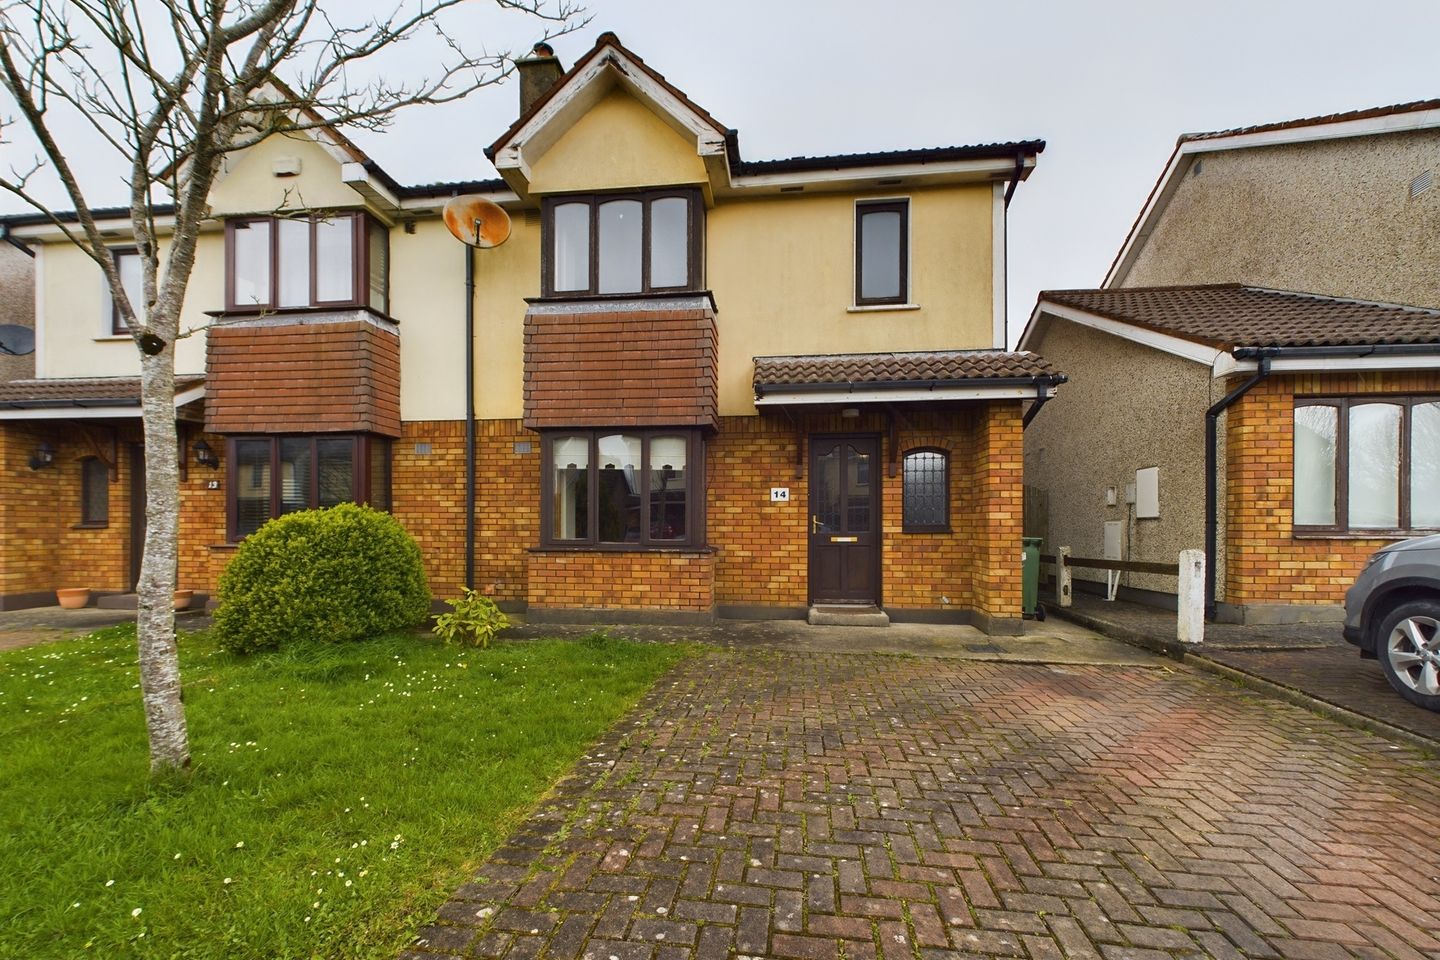 14 Cremore Close, Grange Manor, Waterford City, Co. Waterford, X91W8H1